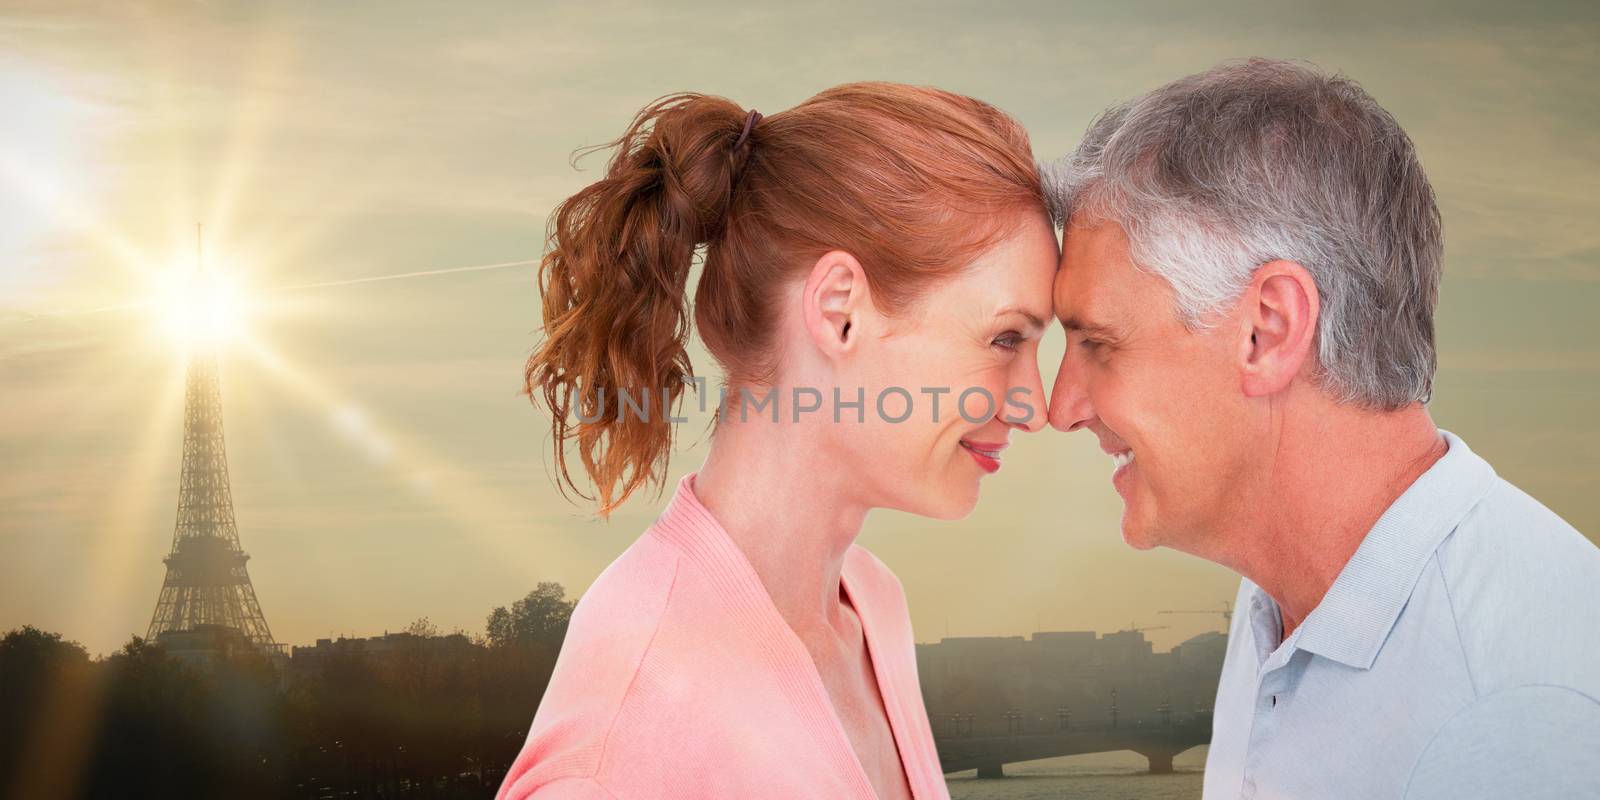 Composite image of casual couple smiling at each other by Wavebreakmedia